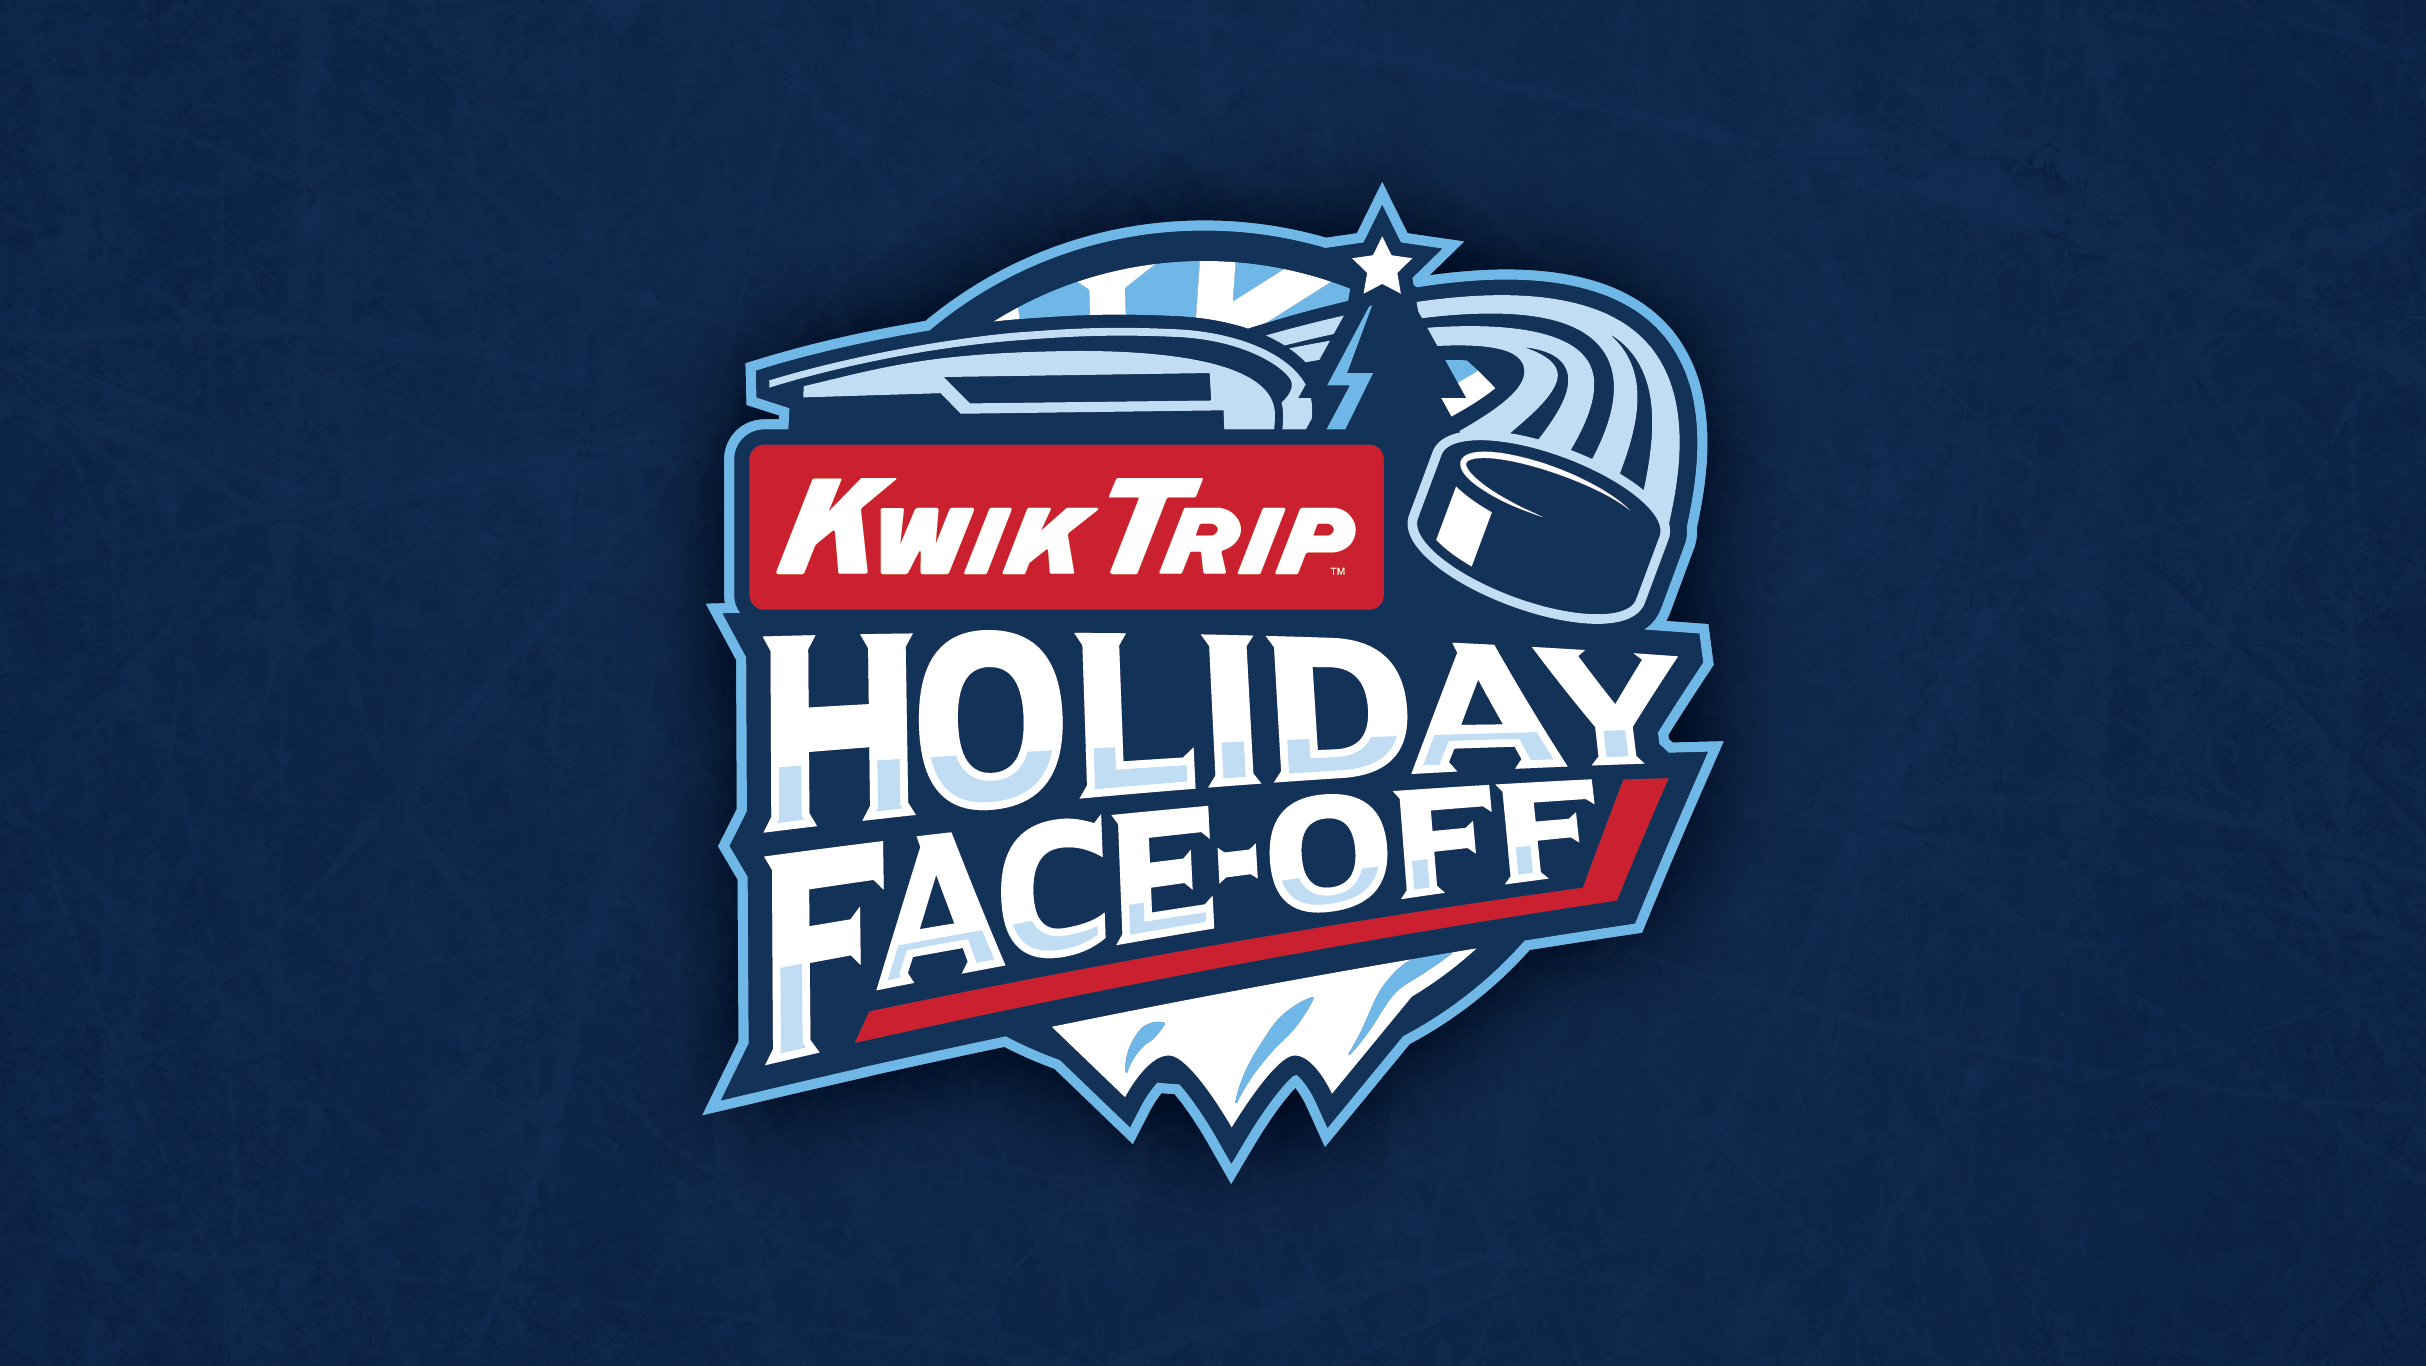 Kwik Trip Holiday Face-Off free pre-sale info for performance tickets in Milwaukee, WI (Fiserv Forum)